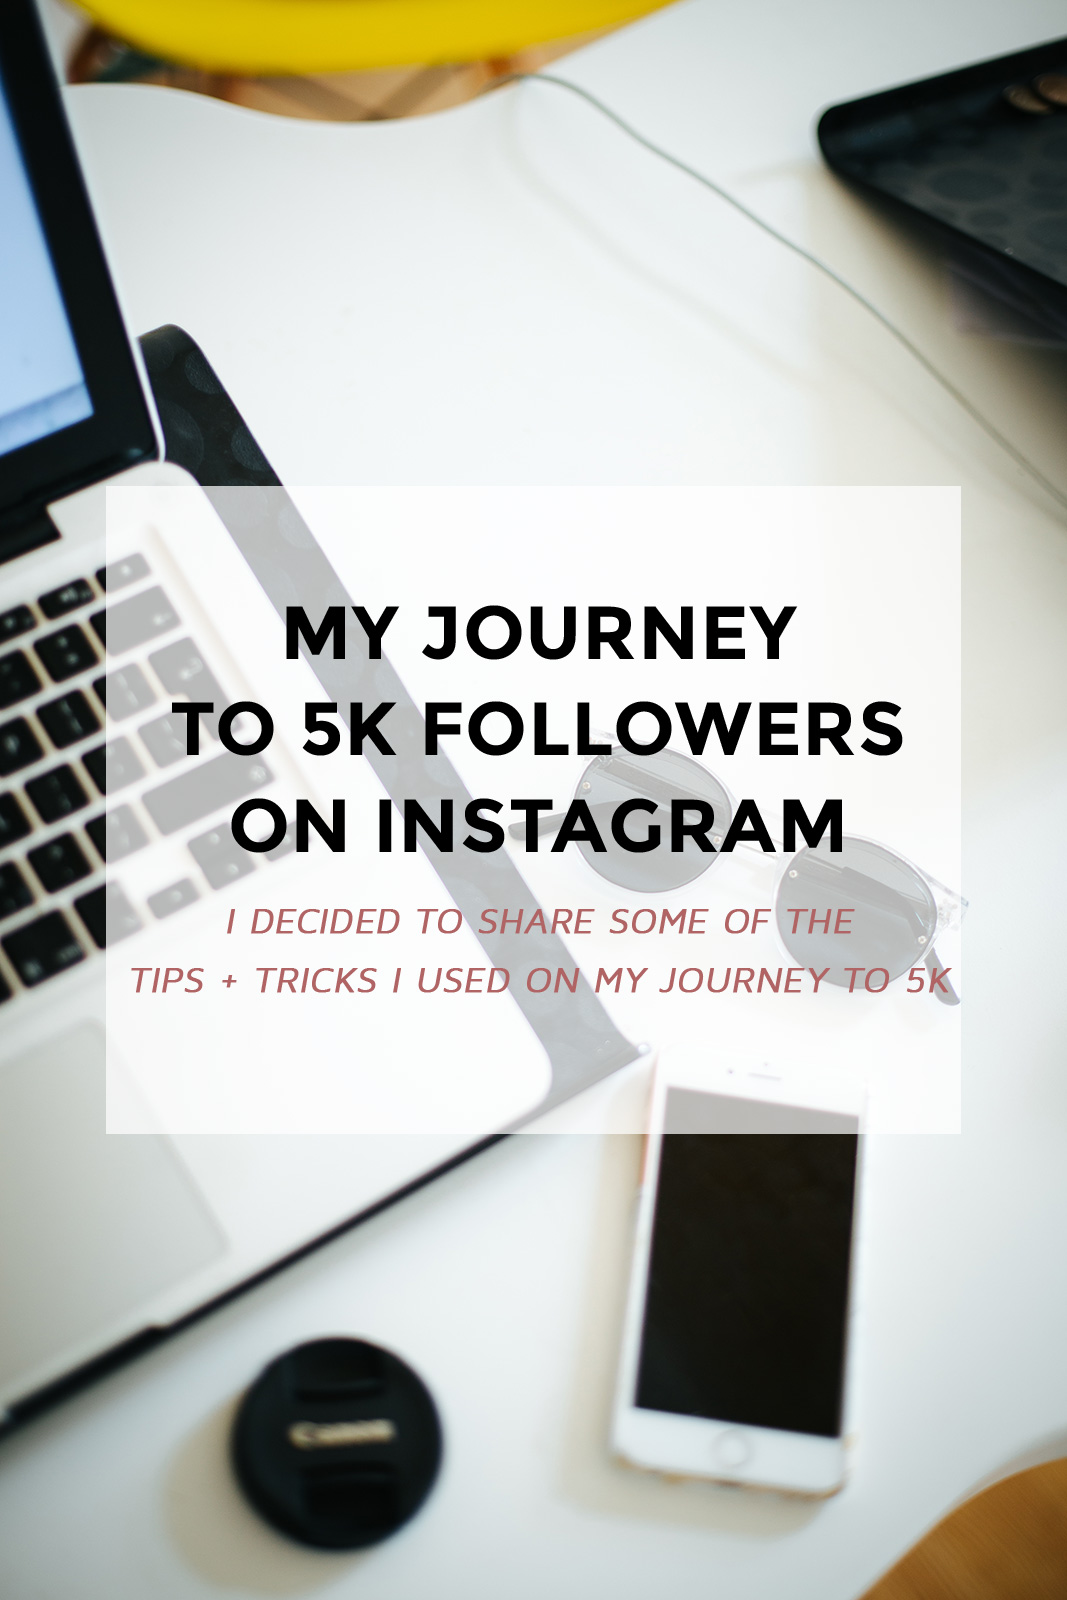 Last week I finally hit my first milestone and reached 5k followers on Instagram. To some, it might not look like a huge achievement, but I believe in following your business stats in order to grow further. For this reason, I decided to share some of the tips + tricks I used on my journey to 5k. (instagram tips, blogging tips, how to grow on instagram, social media tips)